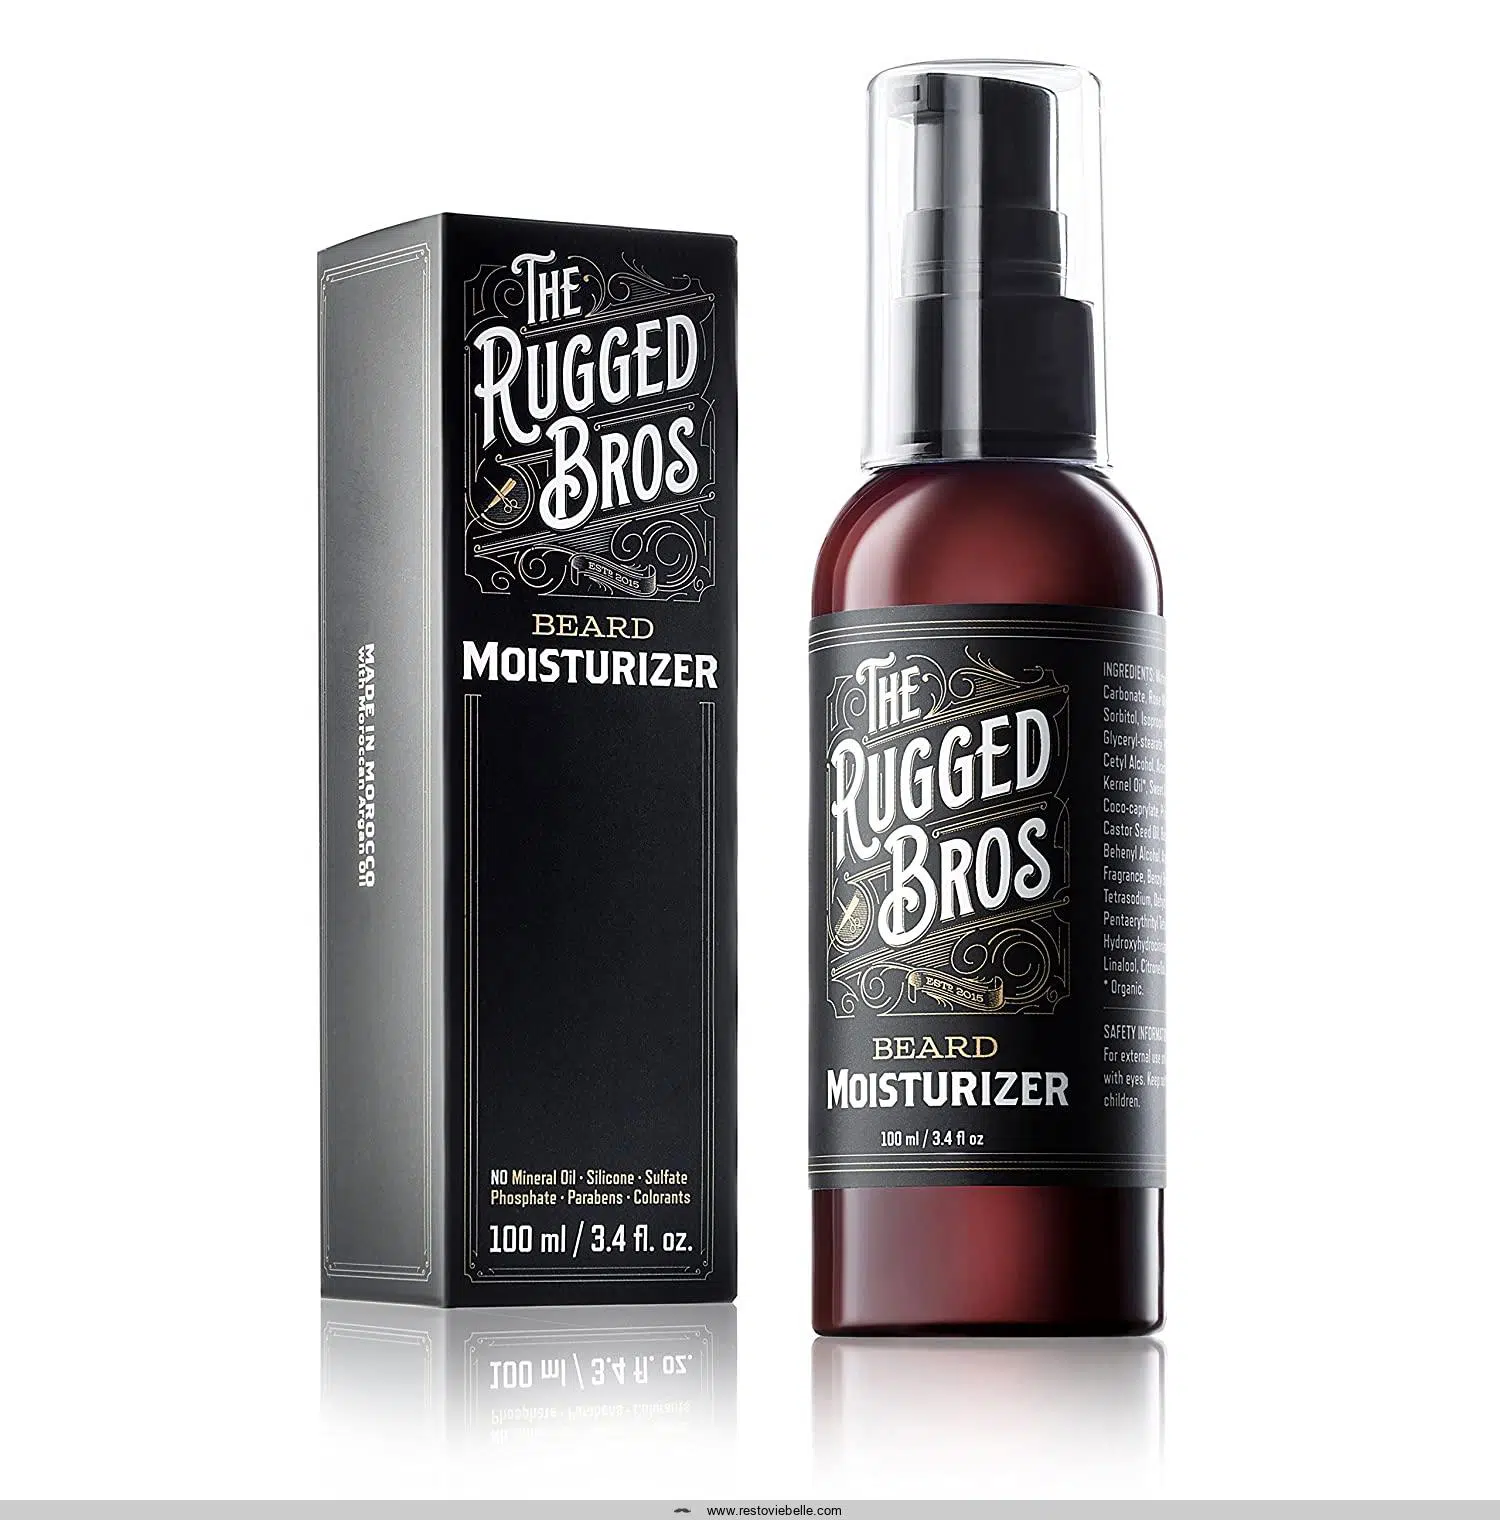 Beard Moisturizer for Men by The Rugged Bros